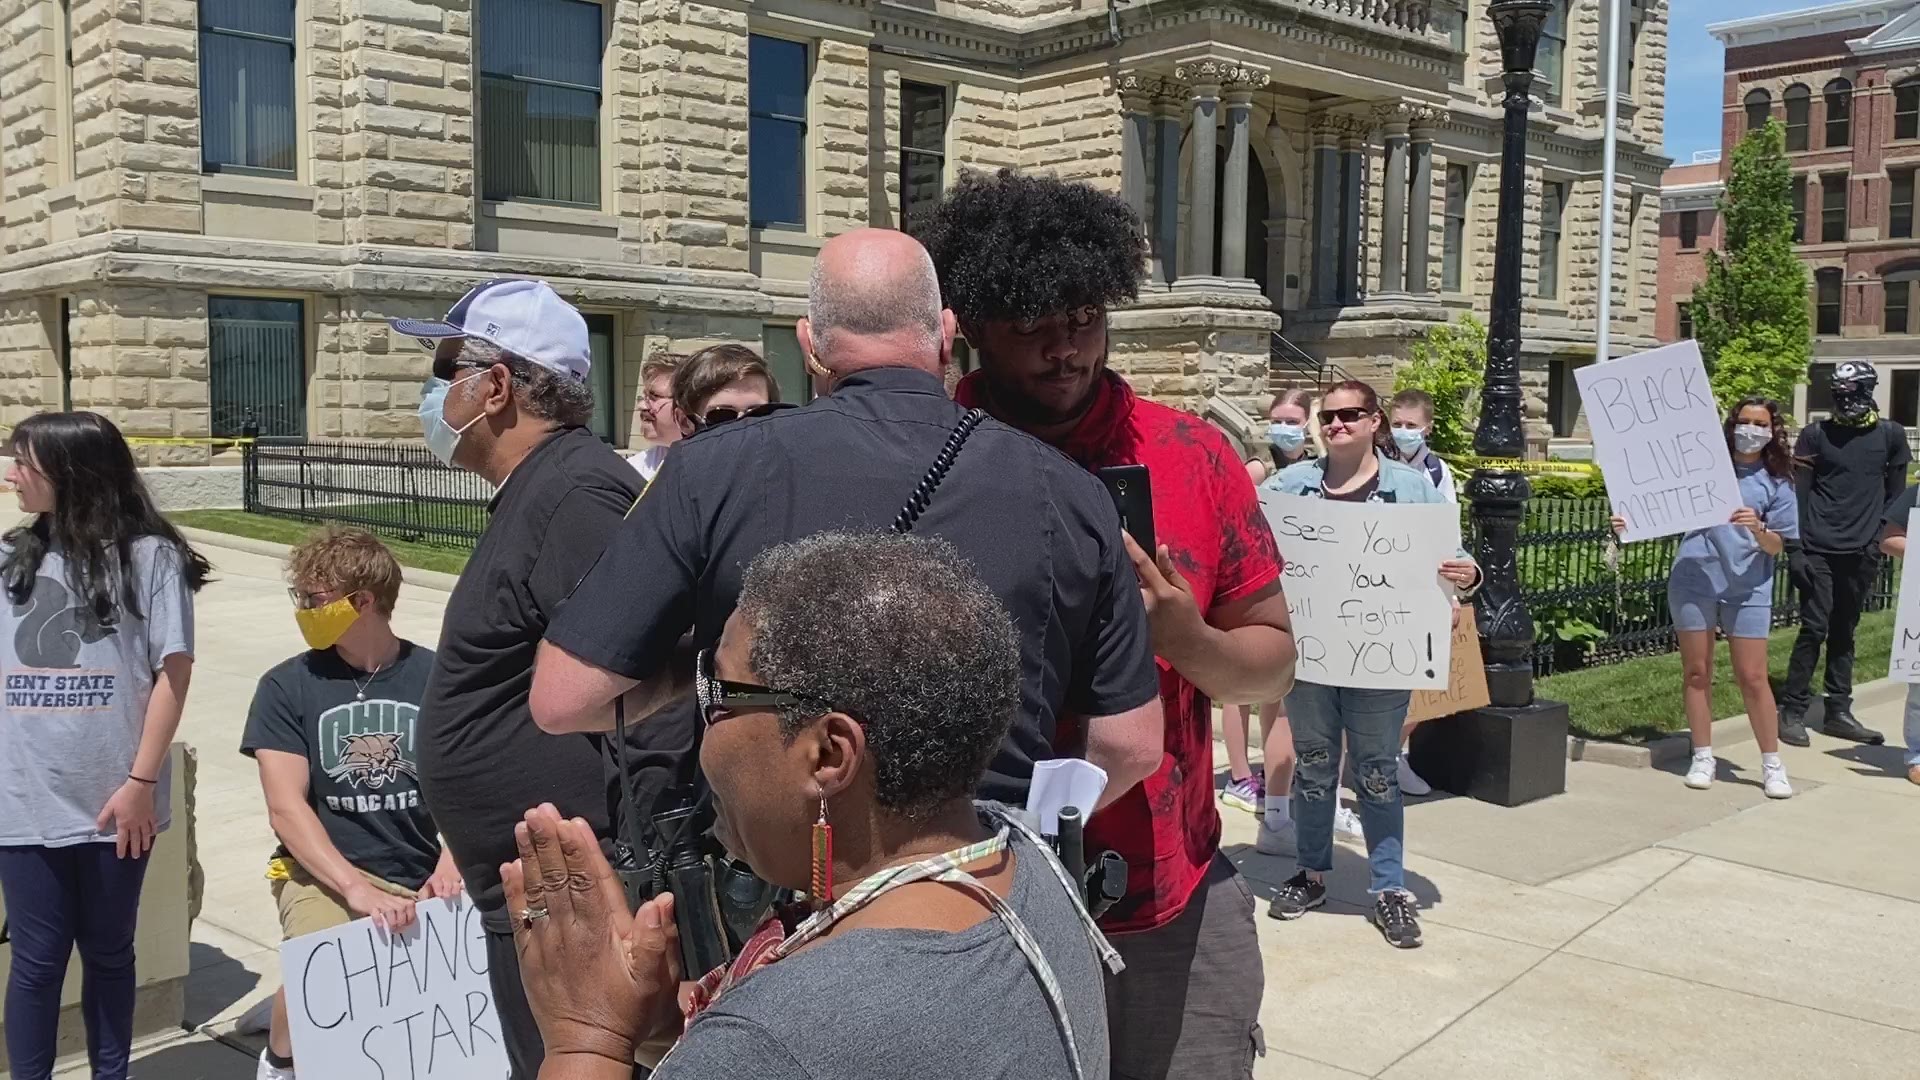 The protest was officially canceled by the organizer following alleged threats of violence. However, a small crowd did still gather in the city's downtown.